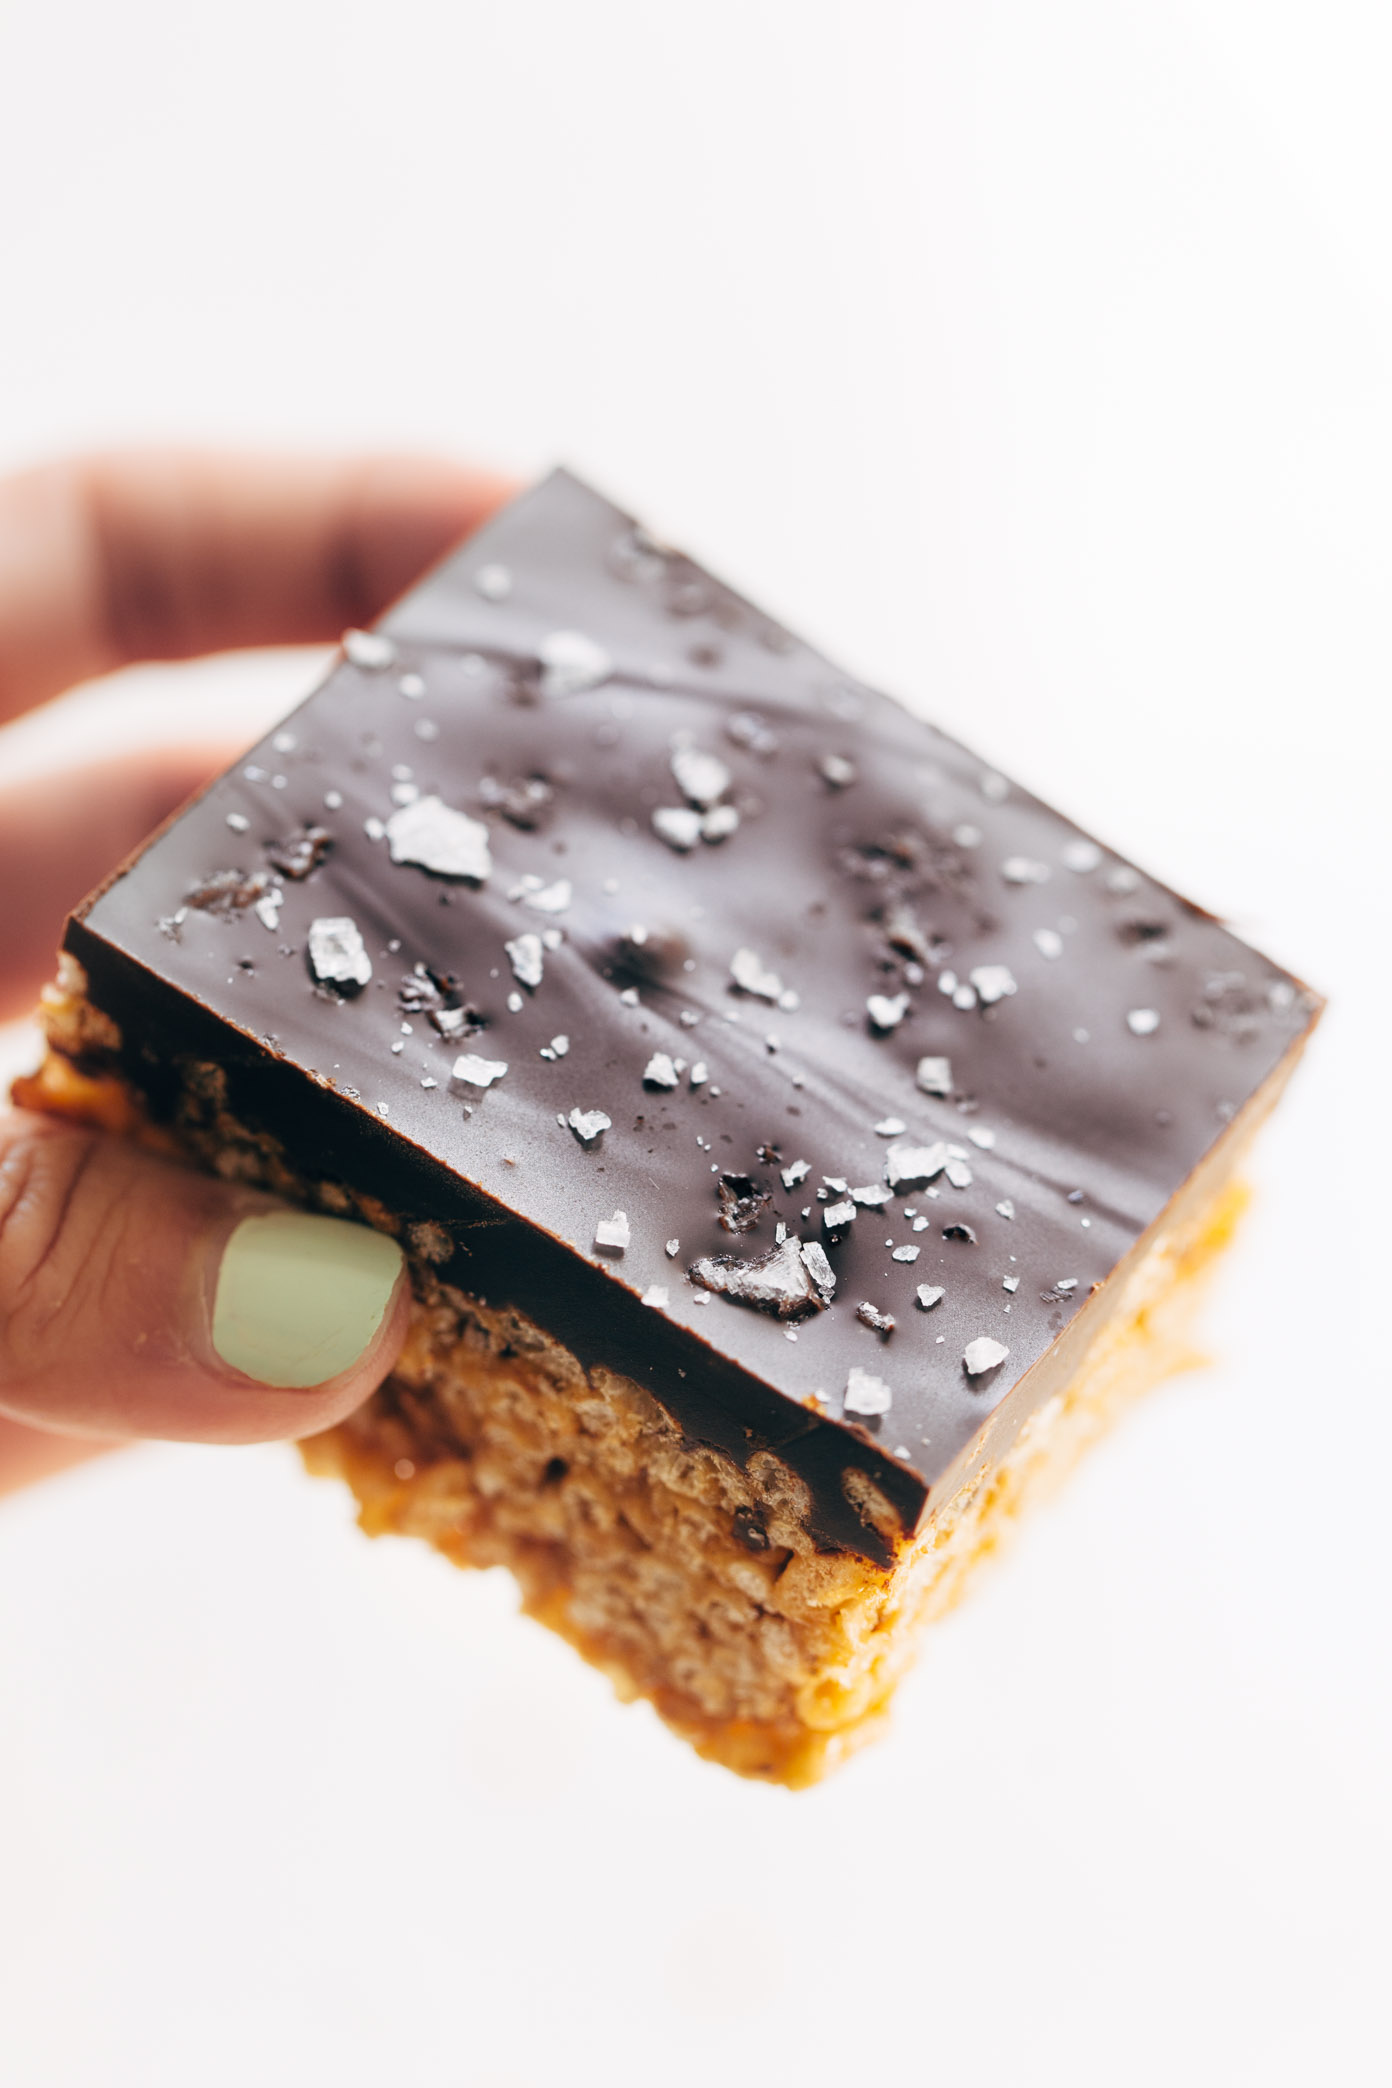 The classic chocolate-covered peanut butter rice krispie bars --> with 5 ingredients and minimal refined sugar, thanks to a few modern swaps! my go-to for road trip snacks. | pinchofyum.com” width=”600″ height=”900″ srcset=”/wp-content/uploads/2017/09/Modern-Scotcheroos-1-4.jpg 1392w, http://cdn.pinchofyum.com/wp-content/uploads/Modern-Scotcheroos-1-4-200×300.jpg 200w, http://cdn.pinchofyum.com/wp-content/uploads/Modern-Scotcheroos-1-4-768×1152.jpg 768w, http://cdn.pinchofyum.com/wp-content/uploads/Modern-Scotcheroos-1-4-600×900.jpg 600w” sizes=”(max-width: 1392px) 100vw, 1392px”></p>
<div class=